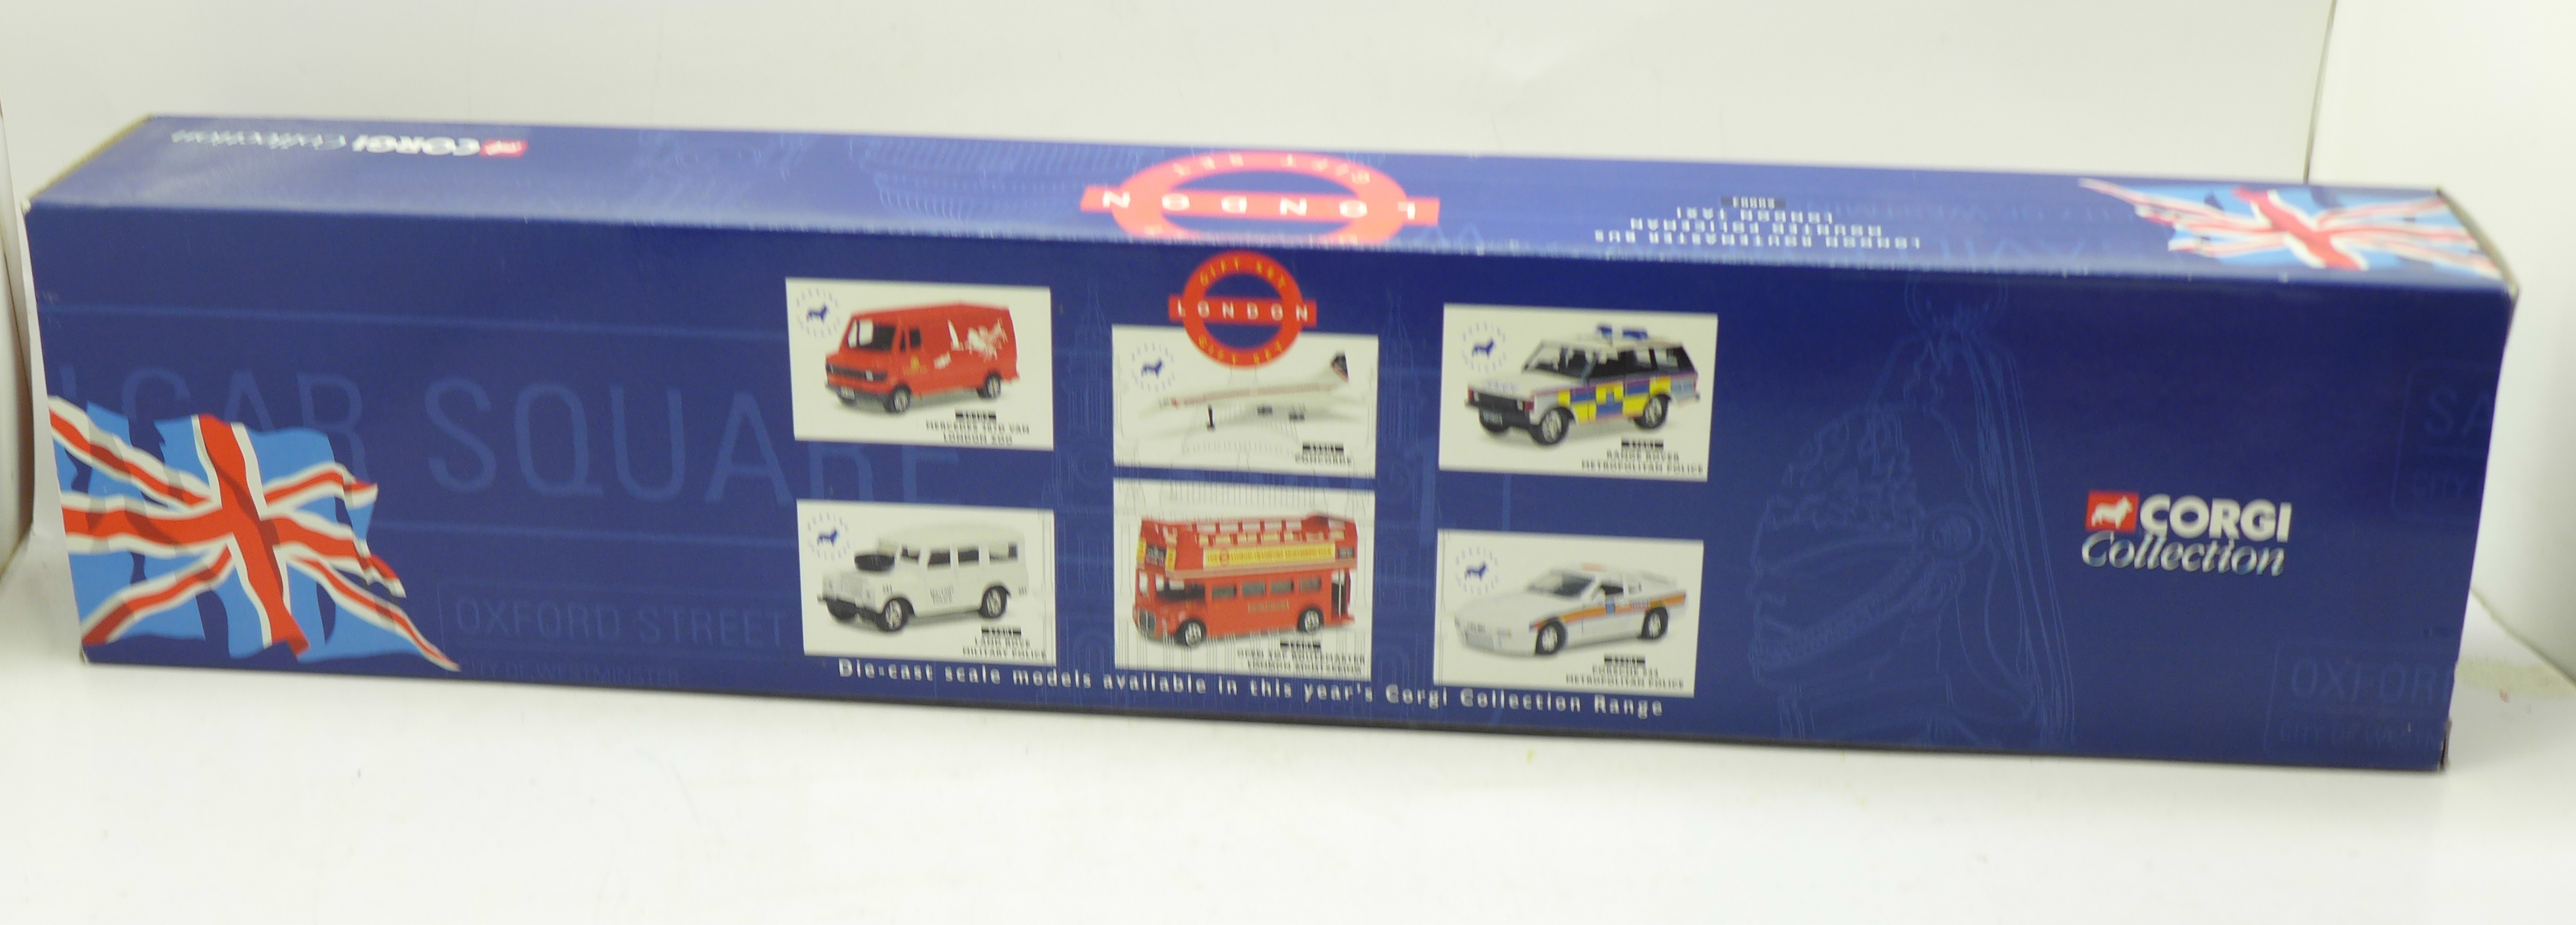 A Corgi Collection, 60003, London Gift Set, Routemaster bus, mounted Policeman and Taxi, boxed - Image 8 of 8